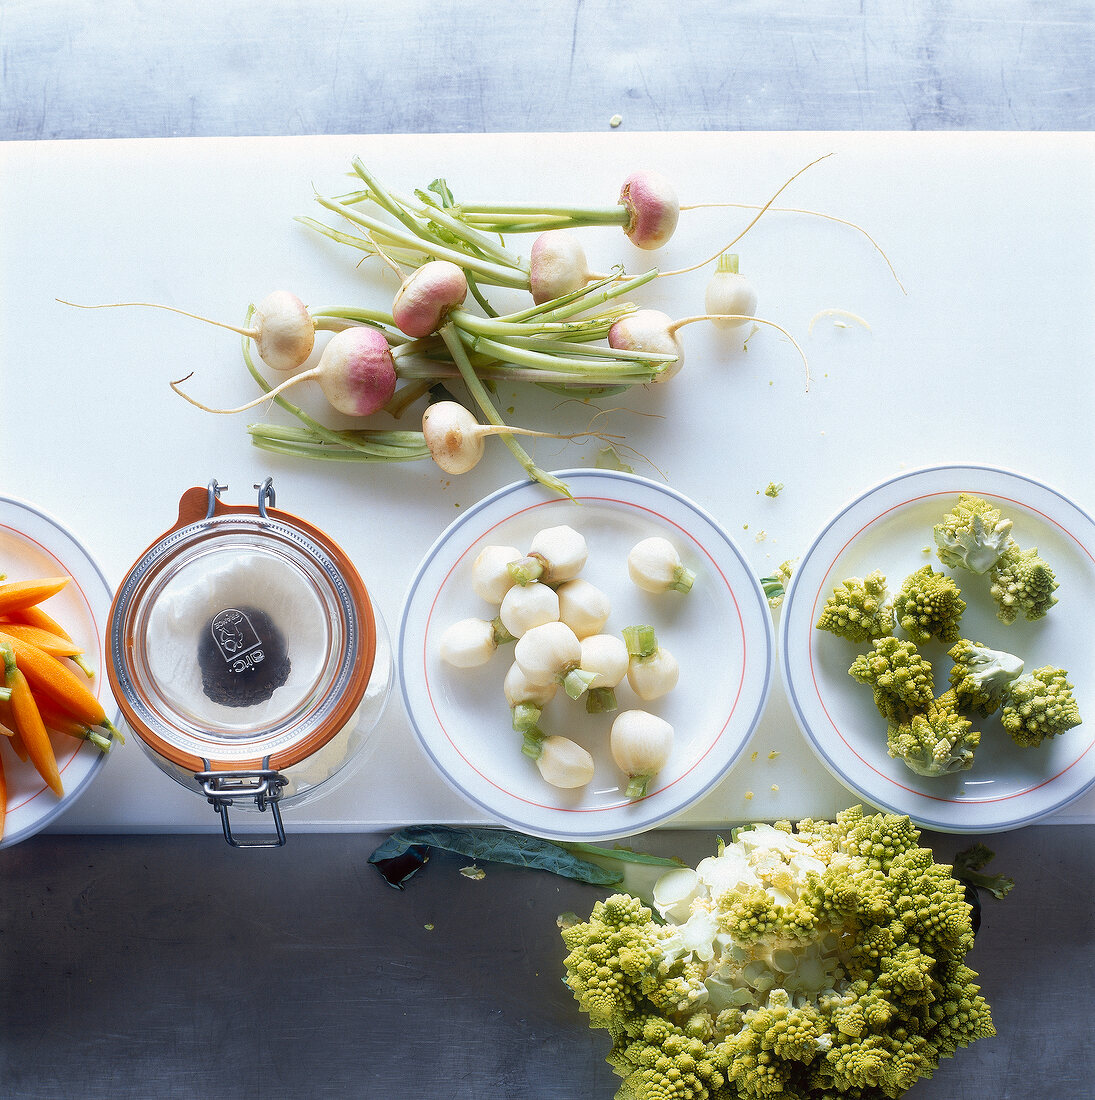 Carrots, turnips and romanesco florets on plates and truffle sauce in jar, overhead view